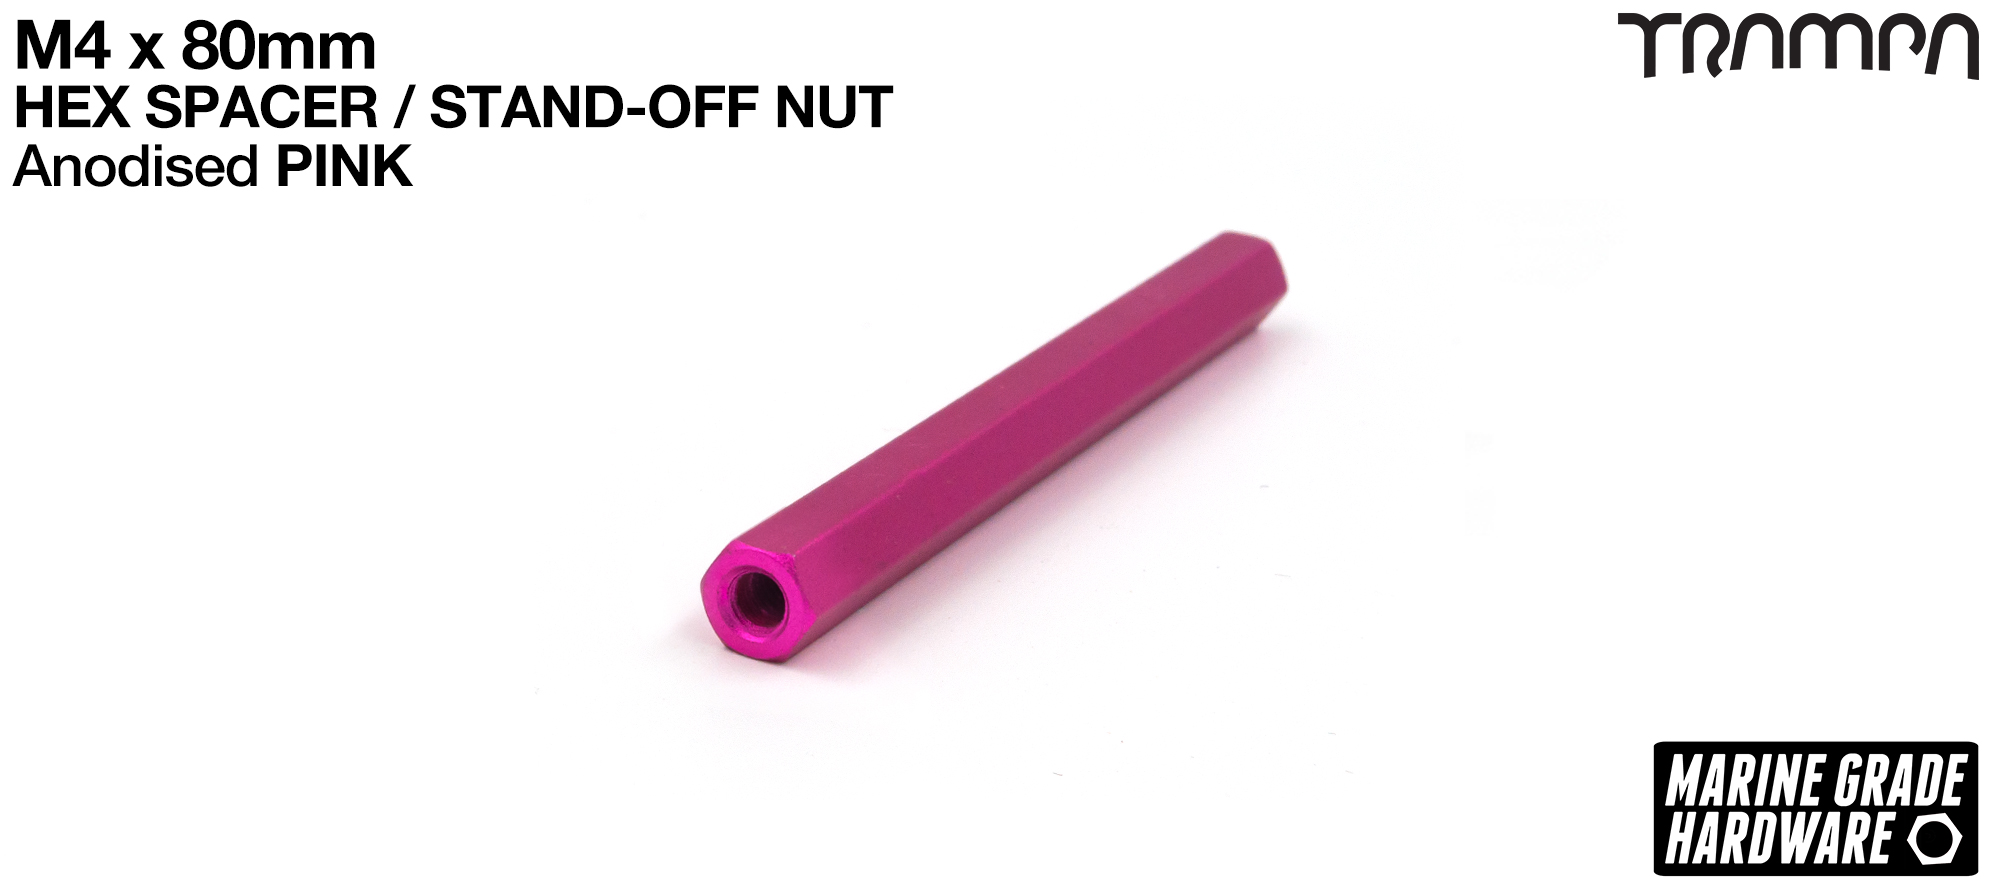 M4 x 80mm Aluminium Threaded Spacer Nut Used for assembling the BEAST Battery Boxes - PINK